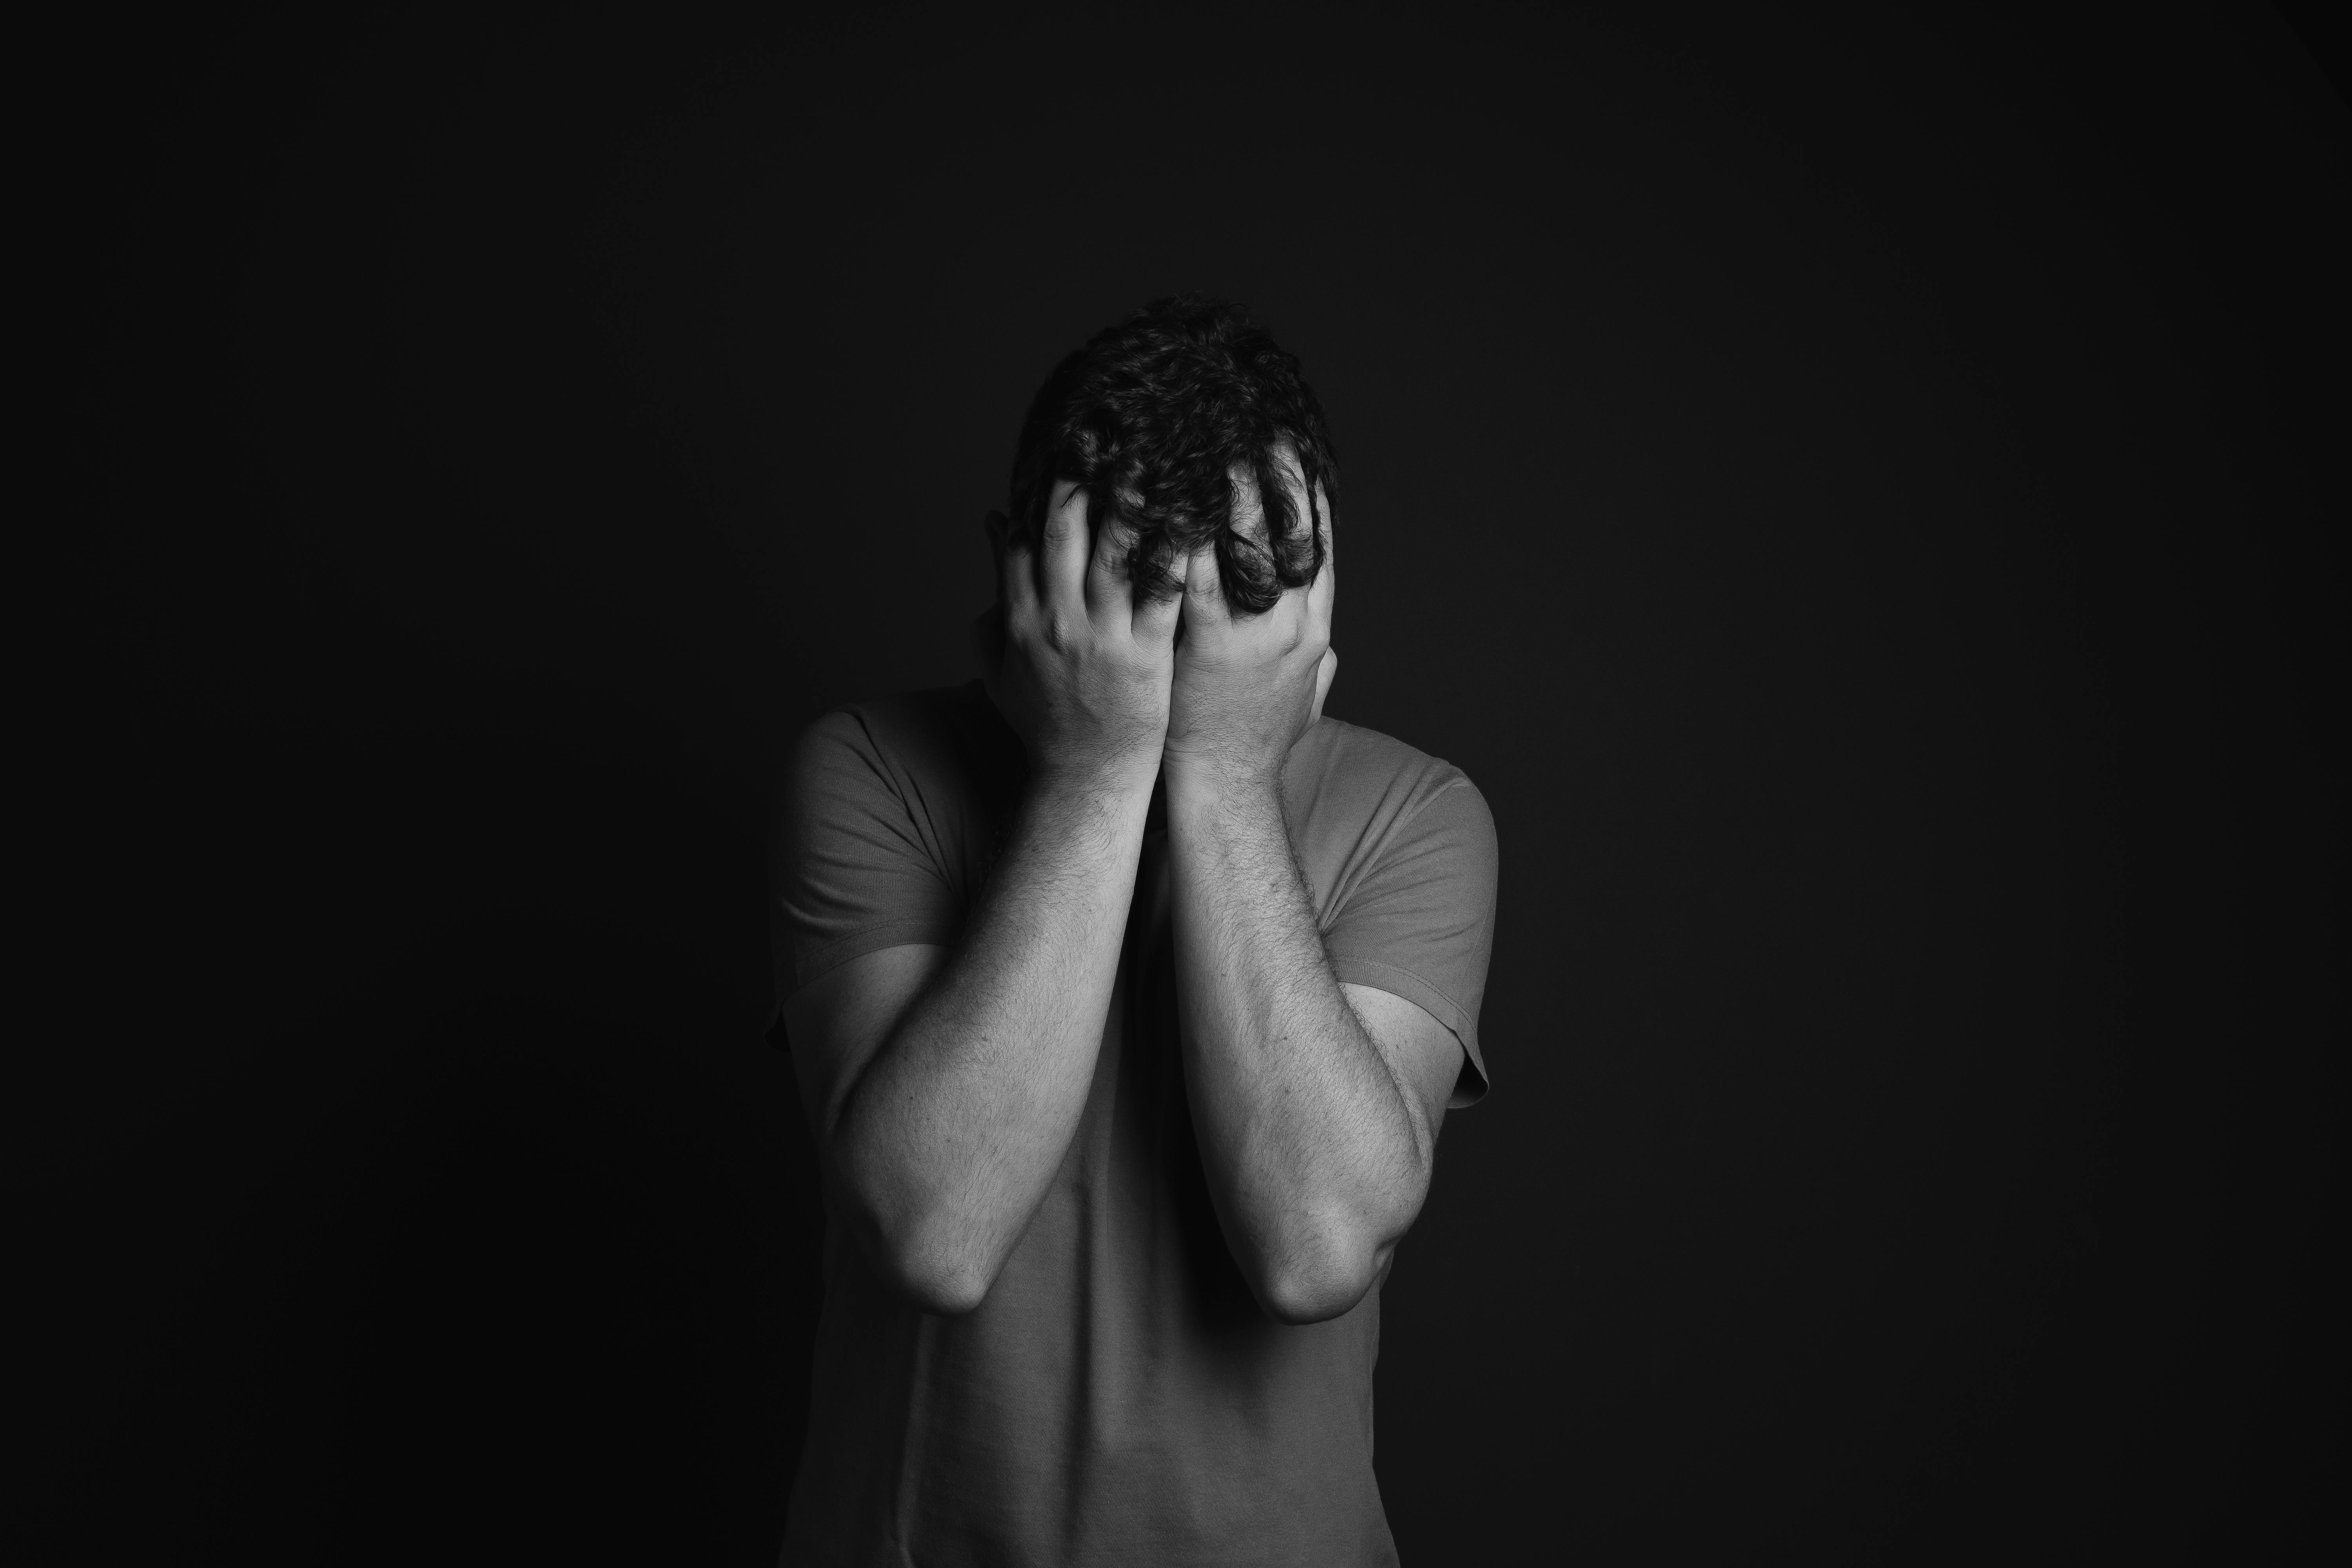 Grayscale photo of a man covering his face with his hands | Source: Pexels